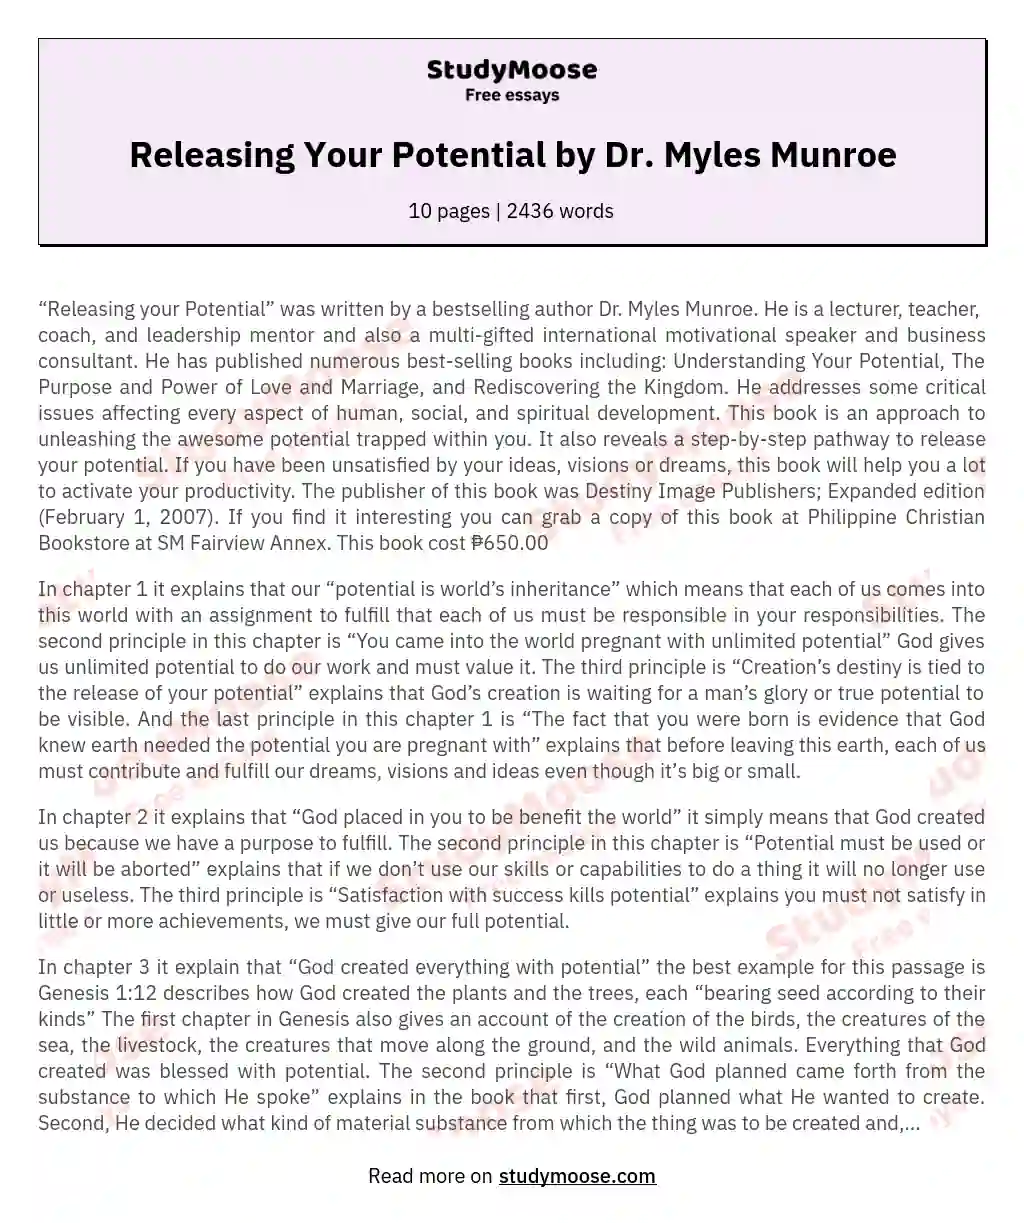 Releasing Your Potential by Dr. Myles Munroe essay